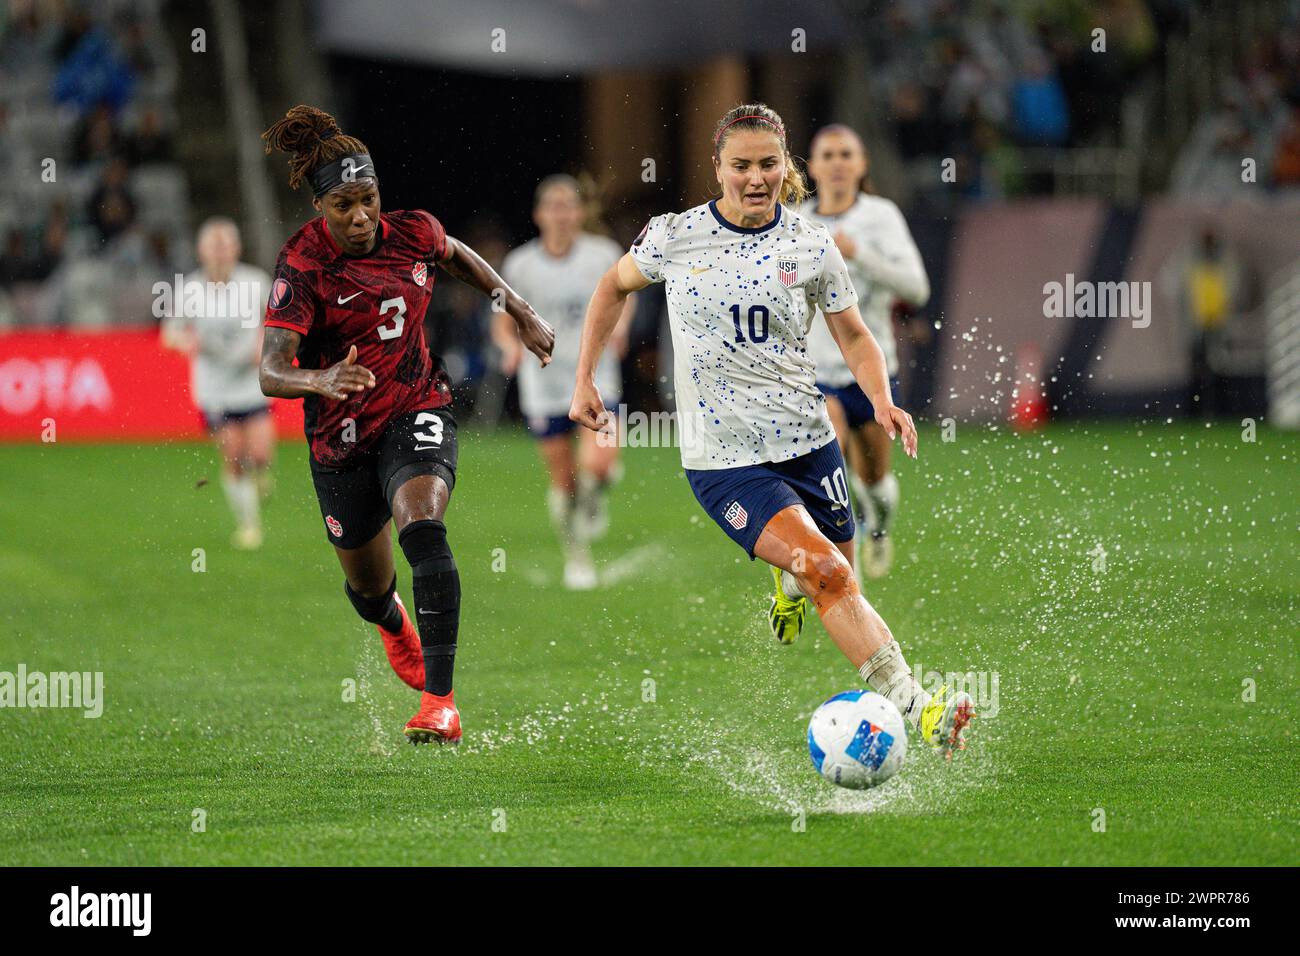 United States midfielder Lindsey Horan (10) is defended by Canada defender Kadeisha Buchanan (3) during the Concacaf W Gold Cup semifinals match, Wedn Stock Photo